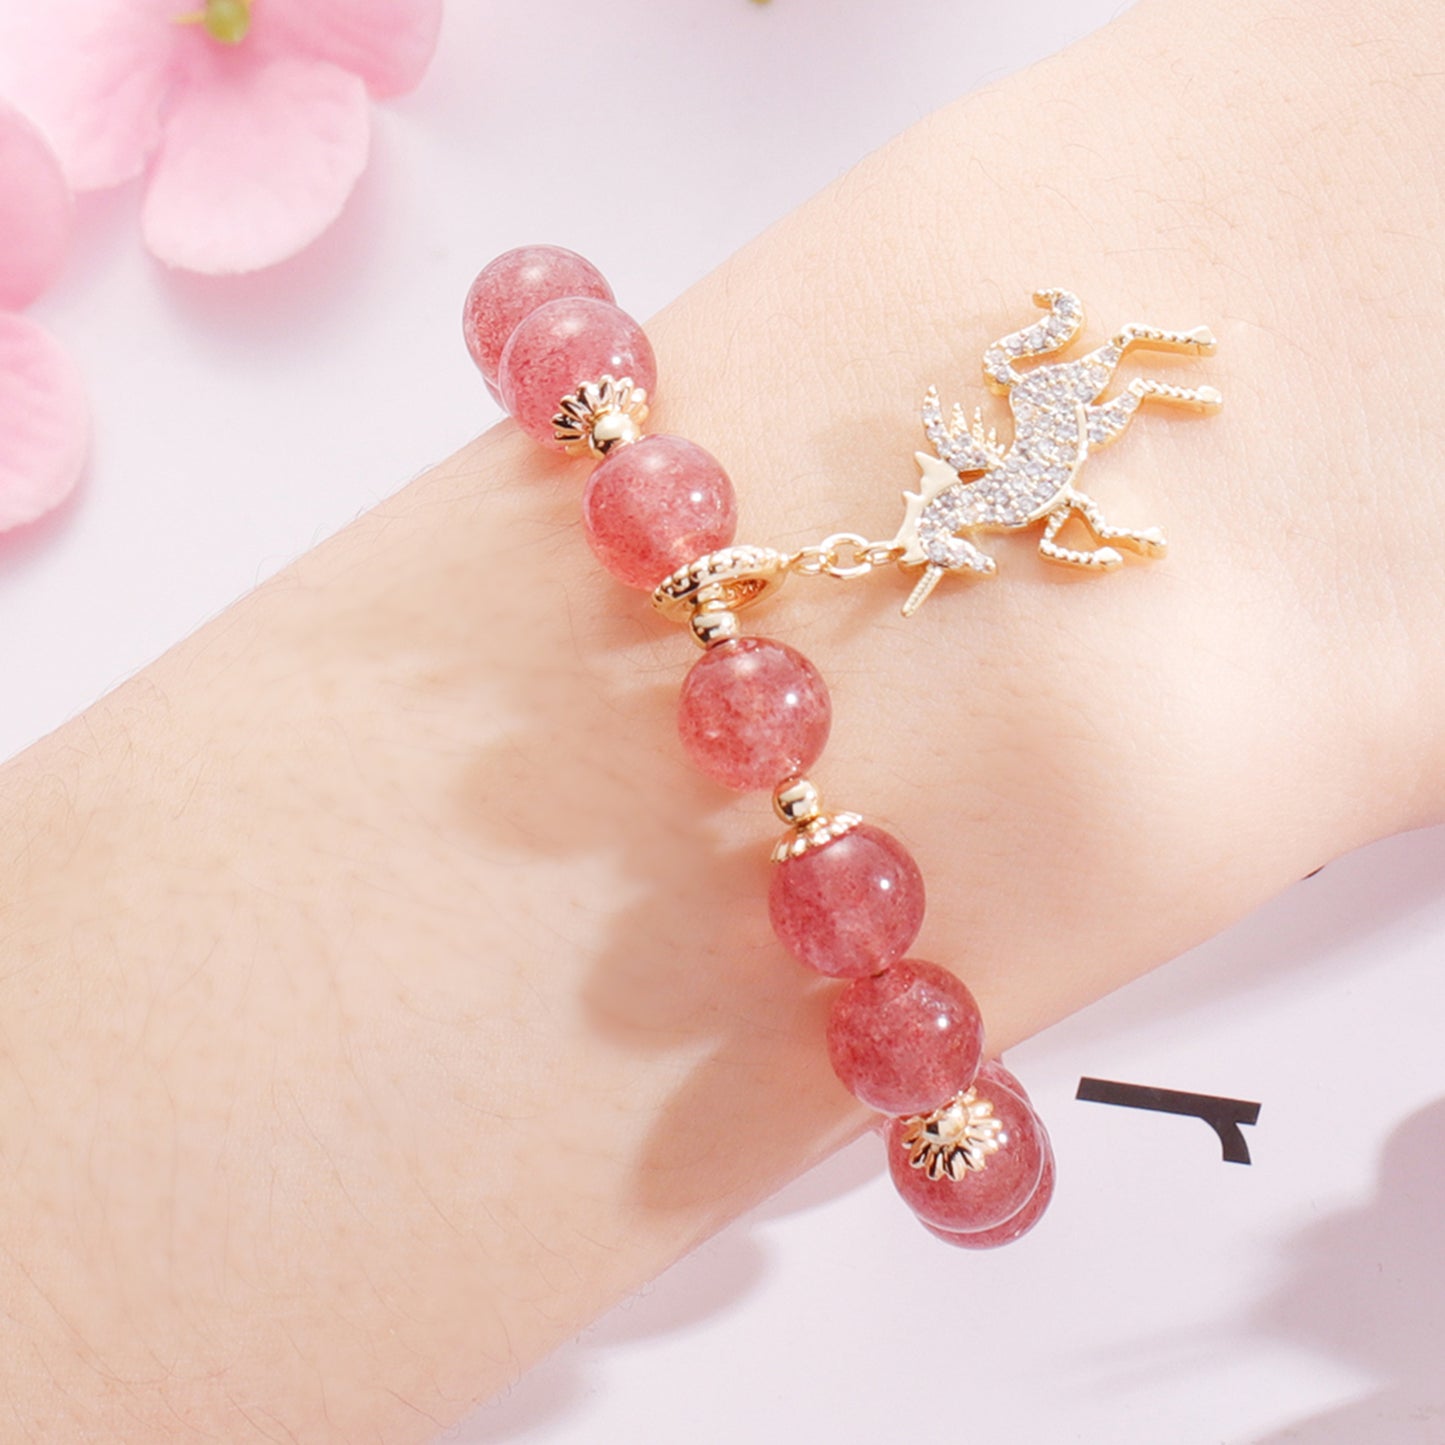 Seeking Wealth and Fortune Crystal Bracelet with Amethyst and Strawberry Crystal